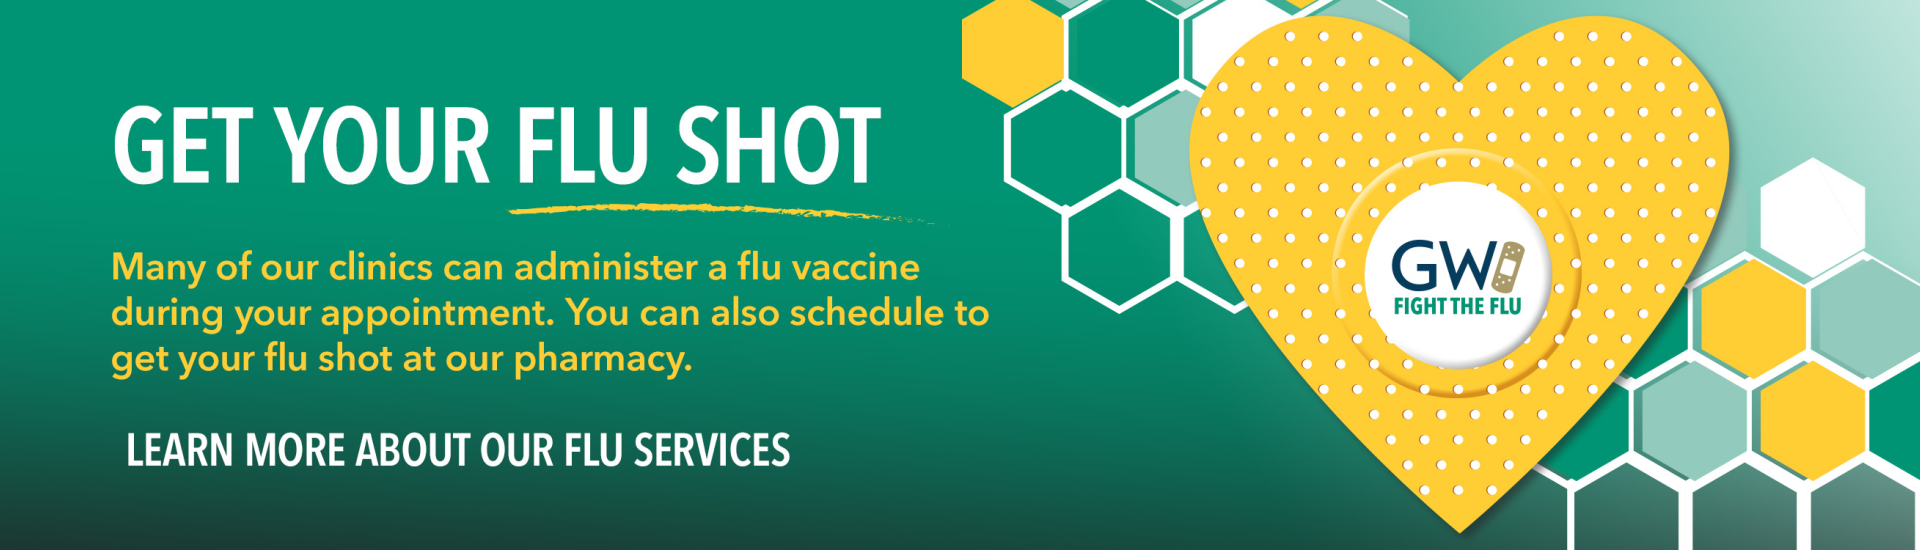 Get your flu shot - The flu shot is the first line of defense. Help protect yourself and your family against the influenza virus.